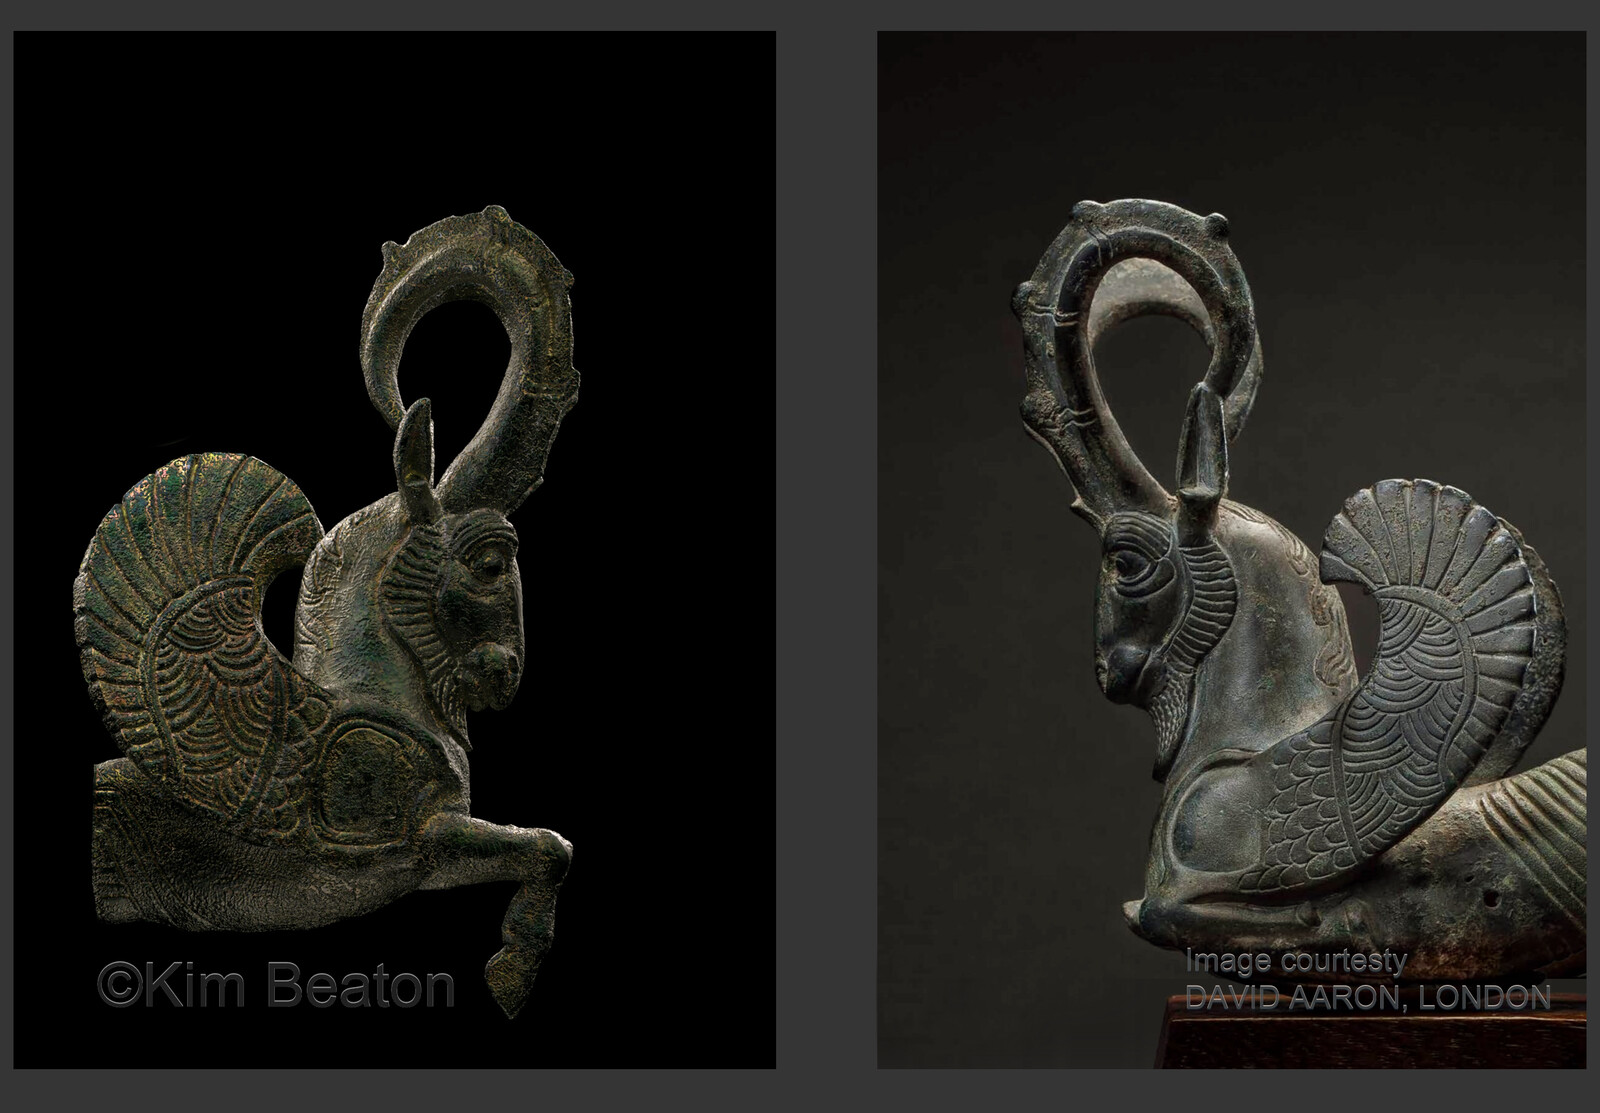 Left: My digital sculpture. Right: 4th century BCE Bronze Artifact that inspired this piece.